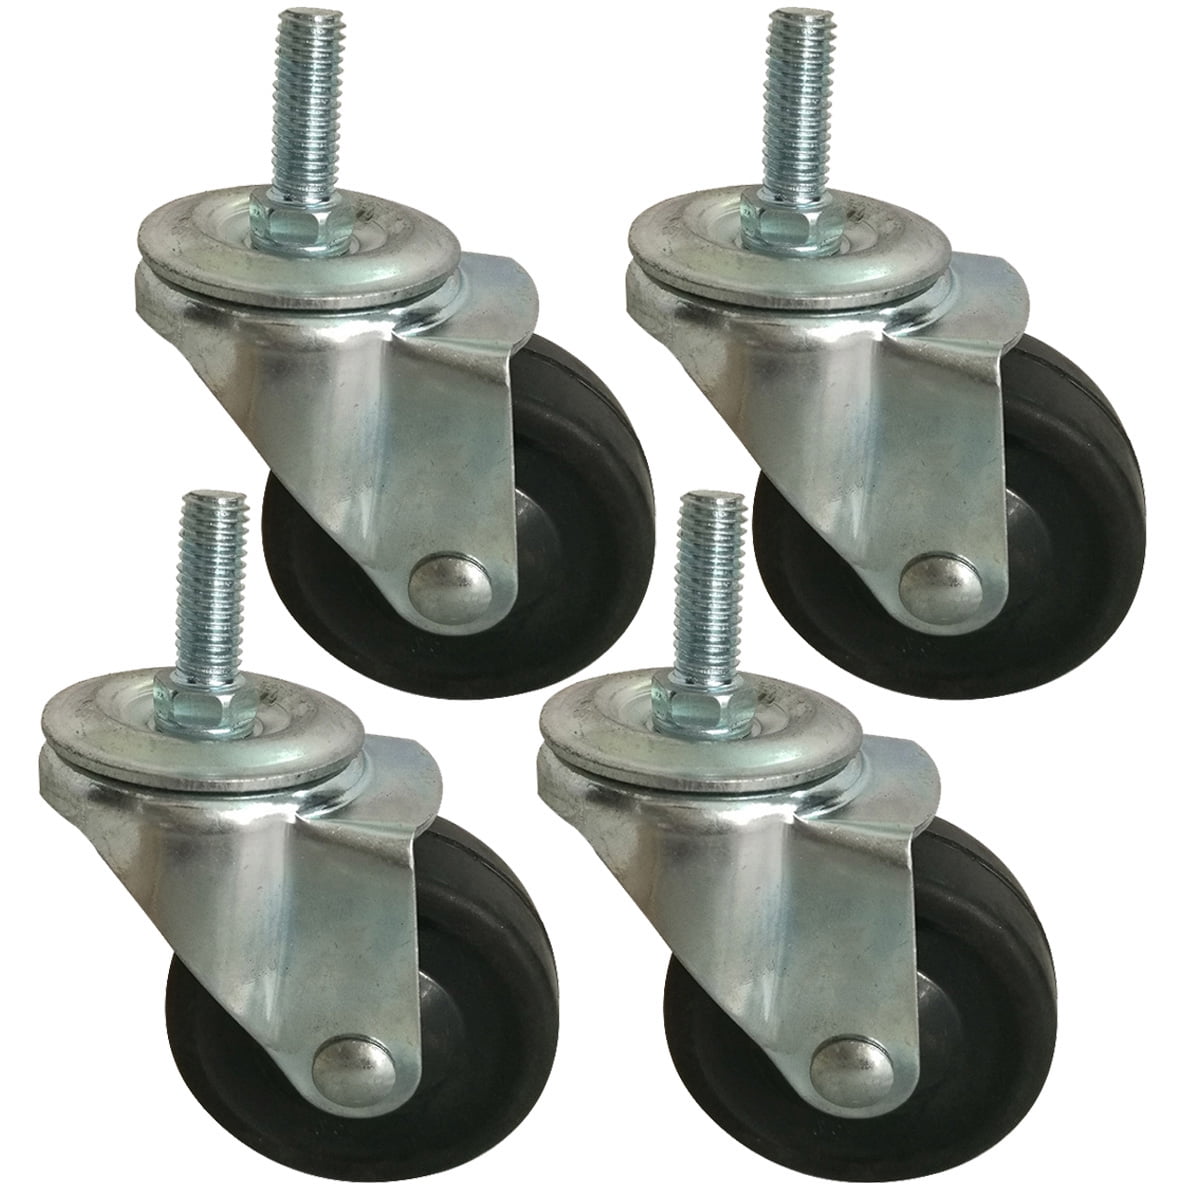 1/4pcs Rubber Casters Heavy Duty Replacement Wheels For Wire Shelving Rack 2inch 